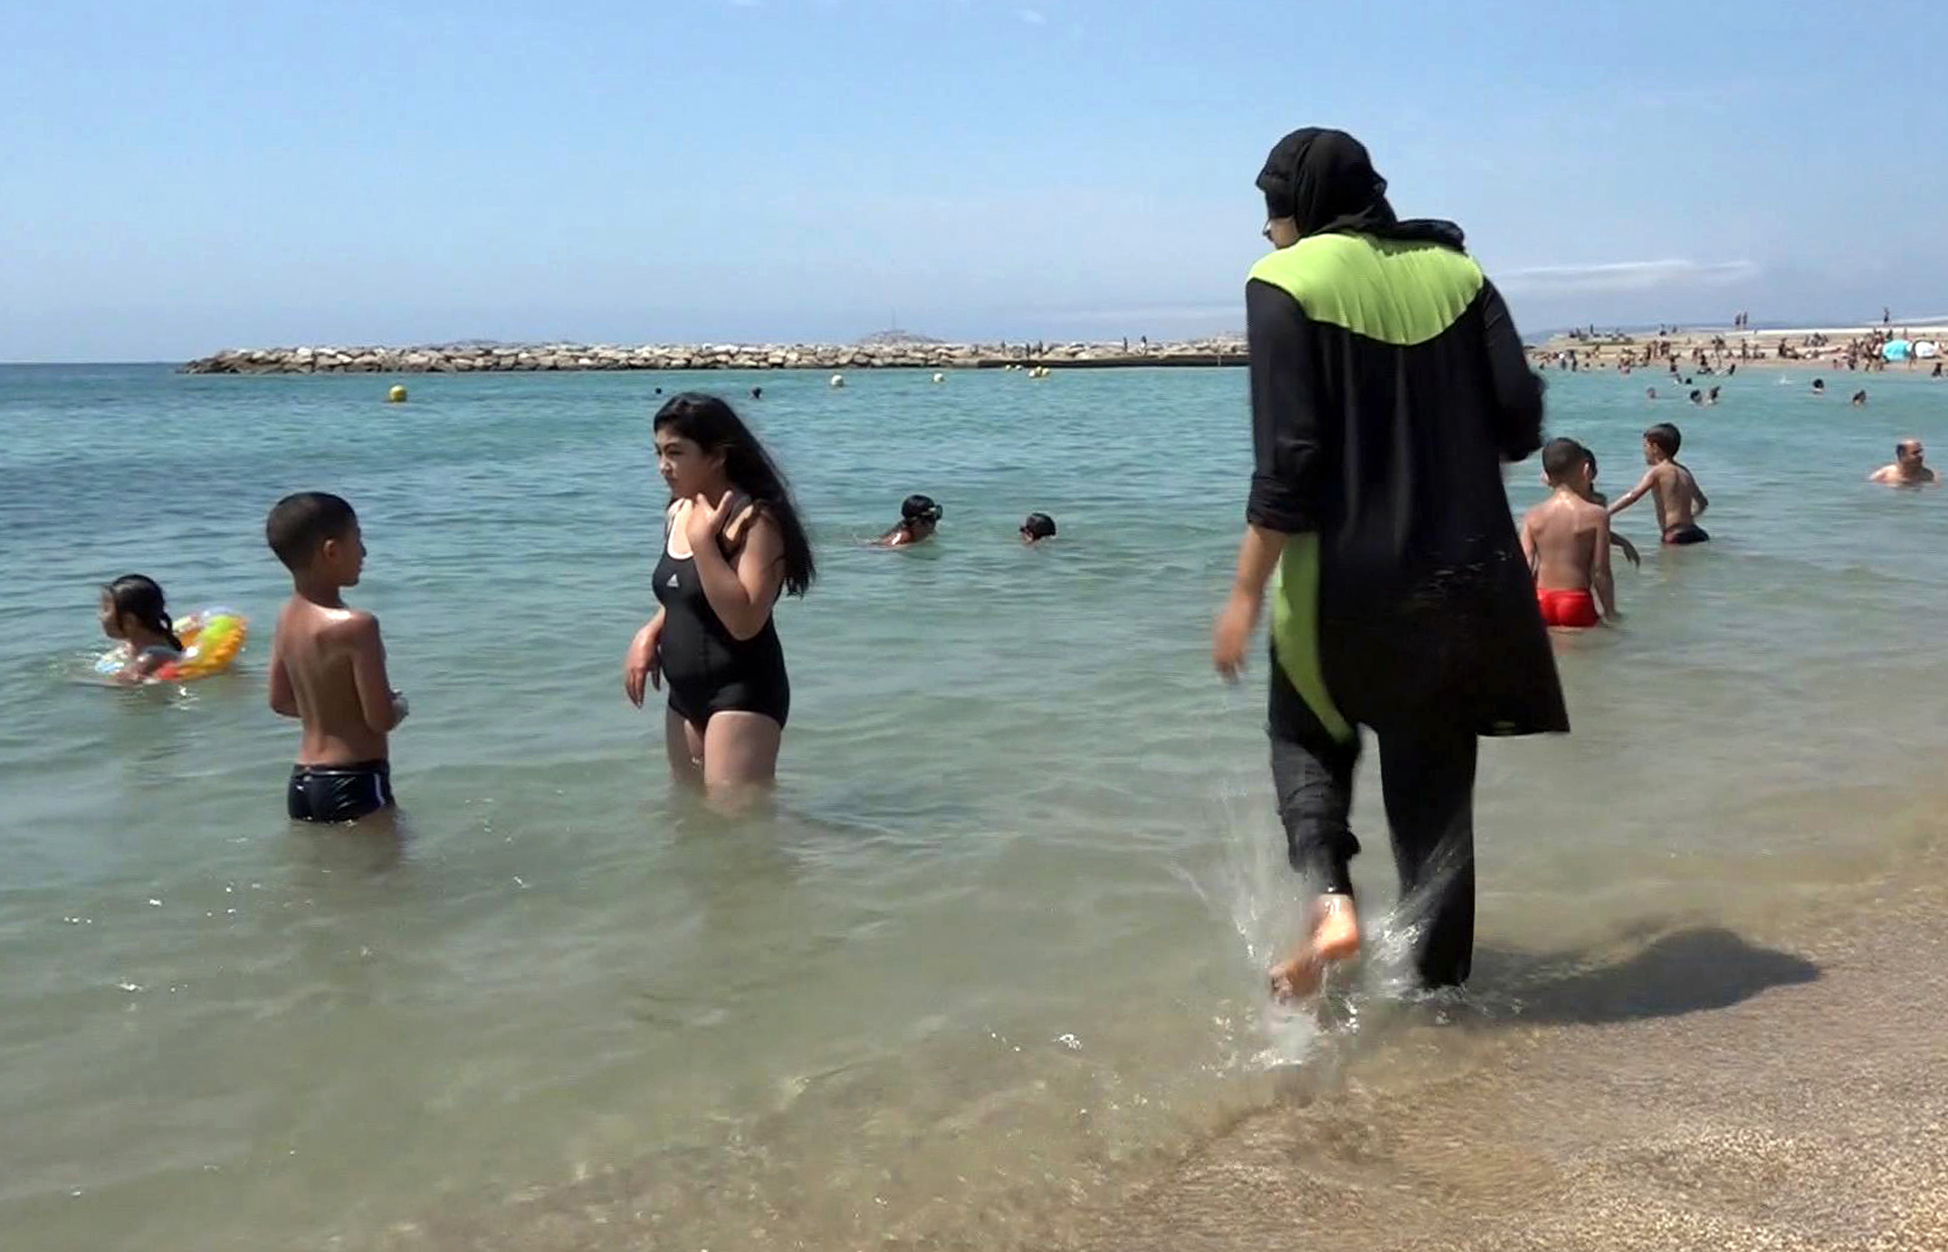 Nissrine Samali, 20, gets into the sea wearing a burkini, a wetsuit-like garment that also covers the head, in Marseille, southern France, Aug. 4, 2016. France's Socialist prime minister Manuel Valls is expressing support for local bans of burkinis, saying the swimwear is based on the "enslavement of women" and therefore not compatible with French values.